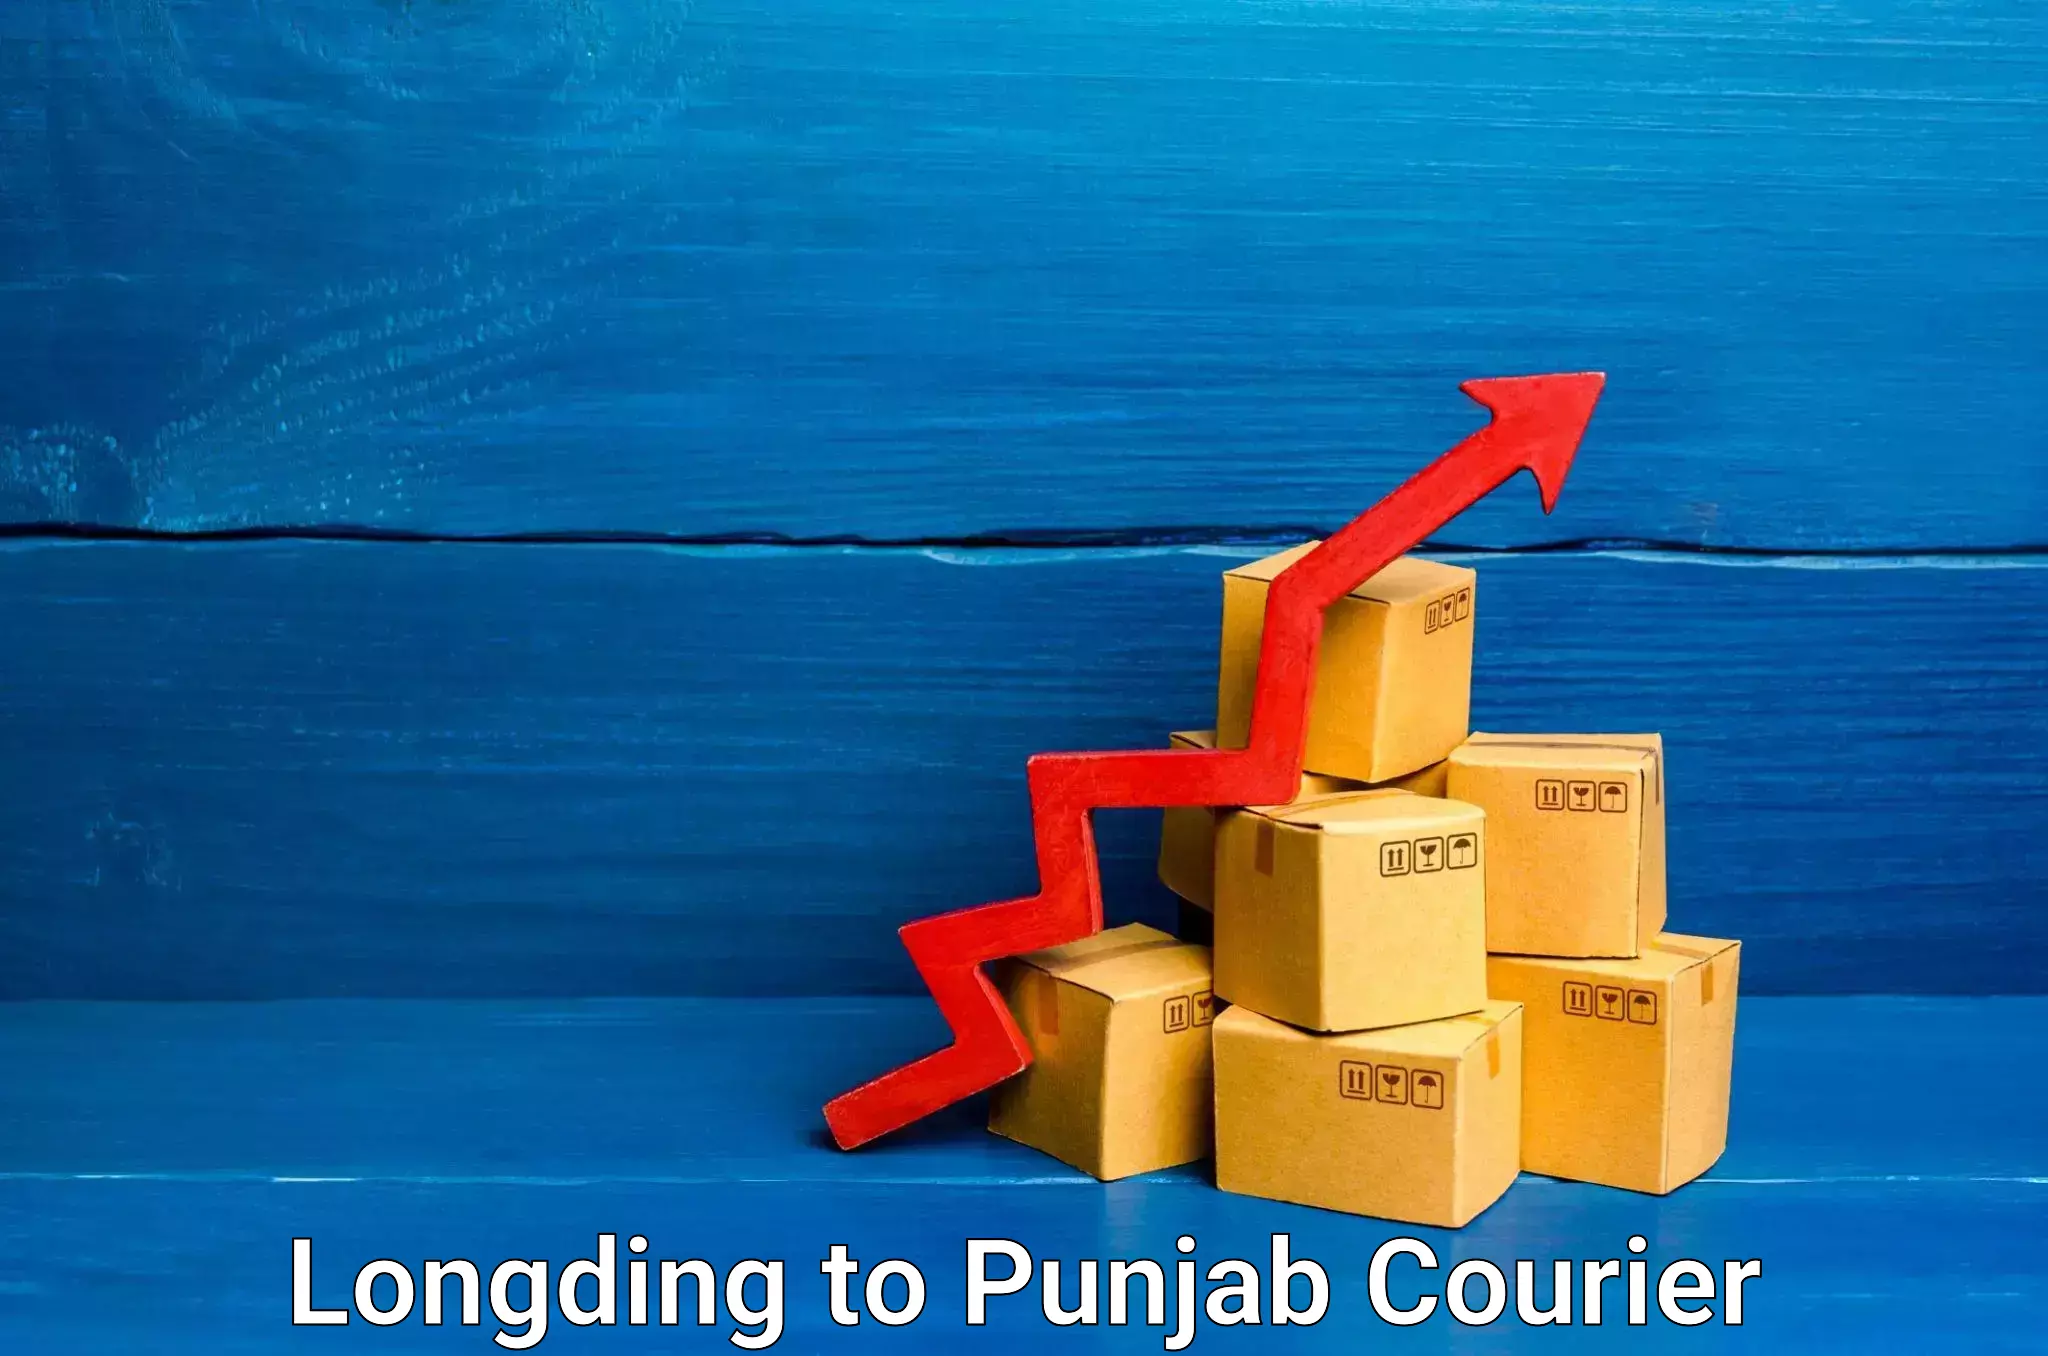 Cash on delivery service in Longding to Punjab